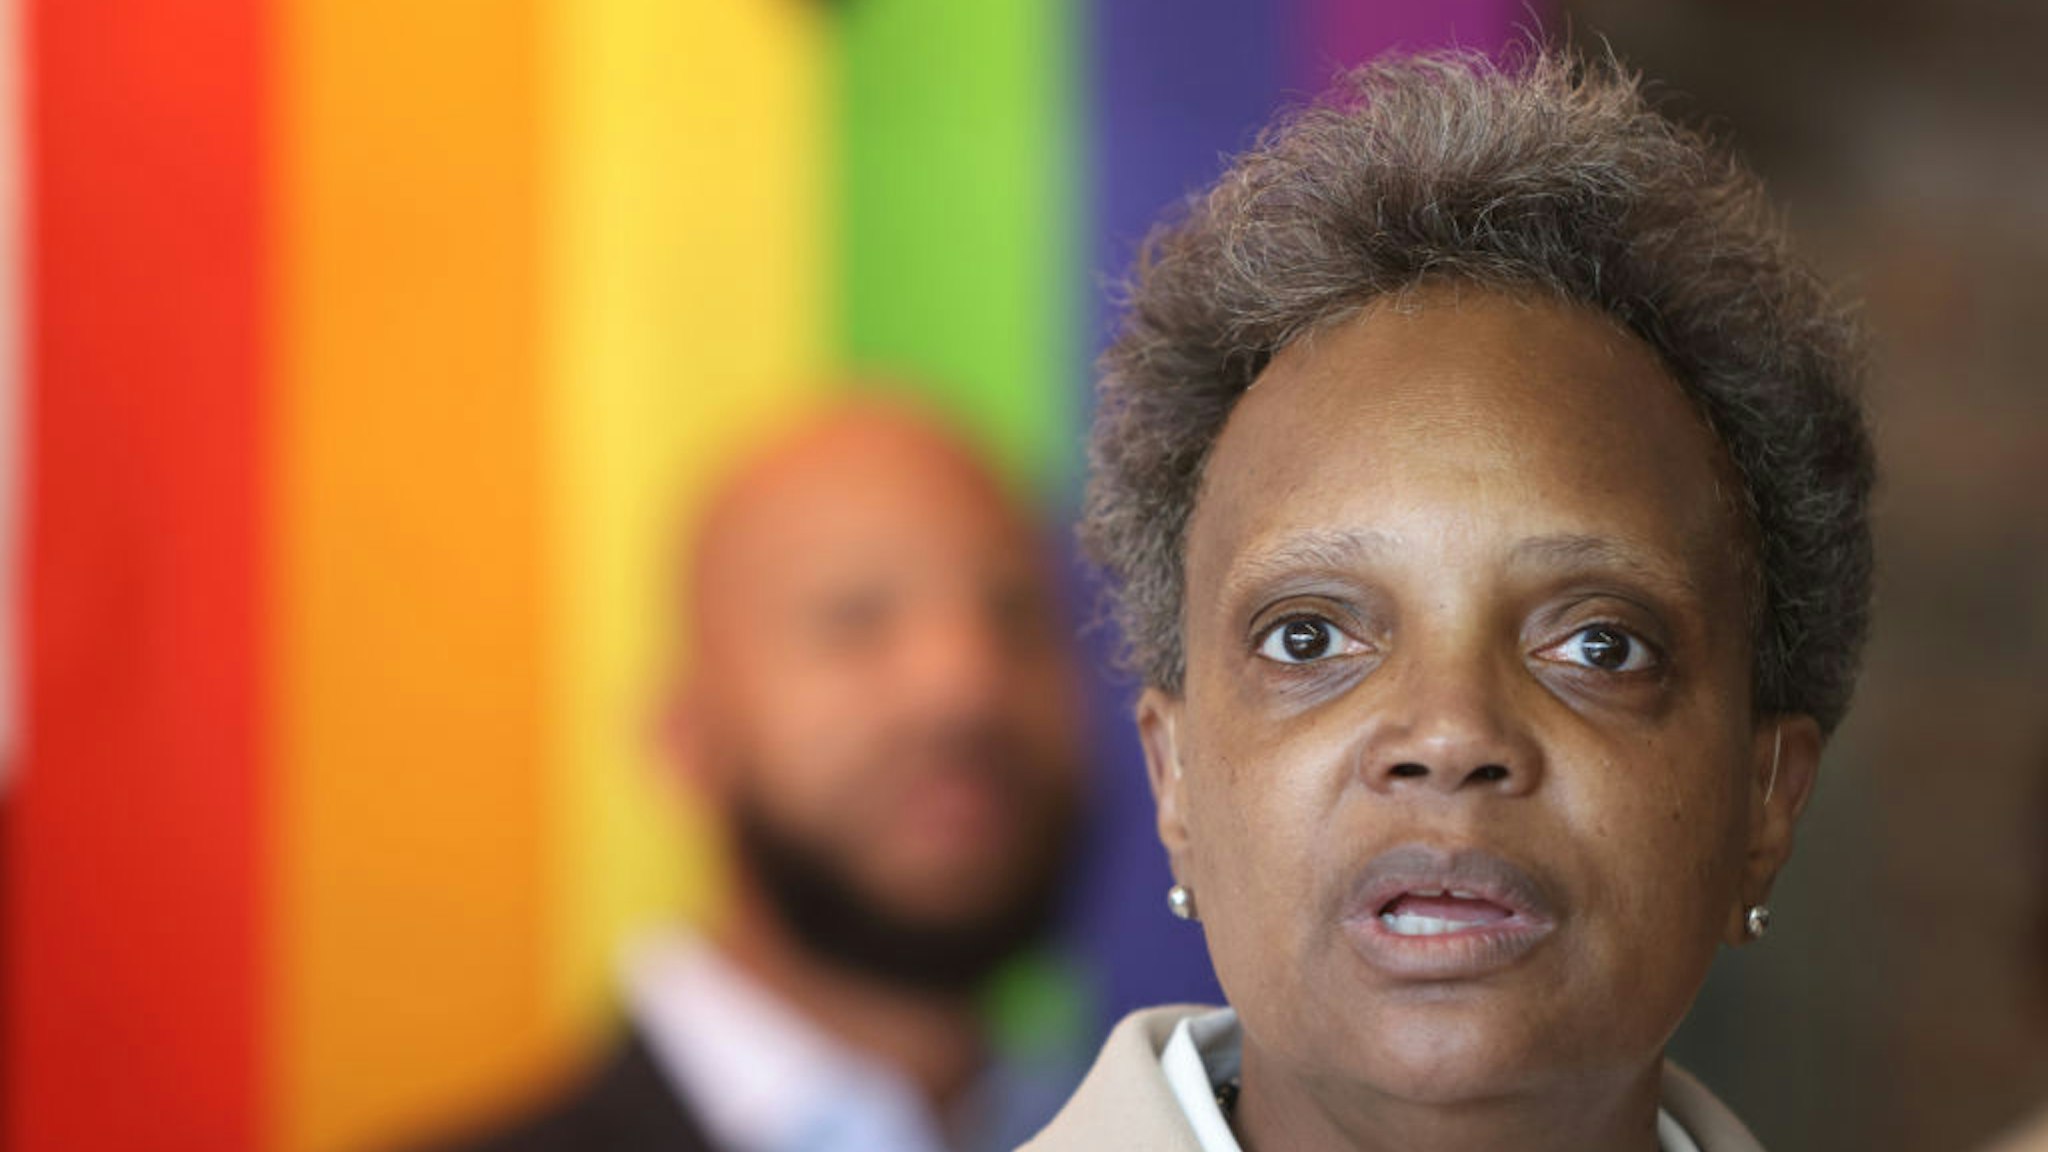 Chicago Mayor Lori Lightfoot speaks to guests at an event held to celebrate Pride Month at the Center on Halstead, a lesbian, gay, bisexual, and transgender community center, on June 07, 2021 in Chicago, Illinois.